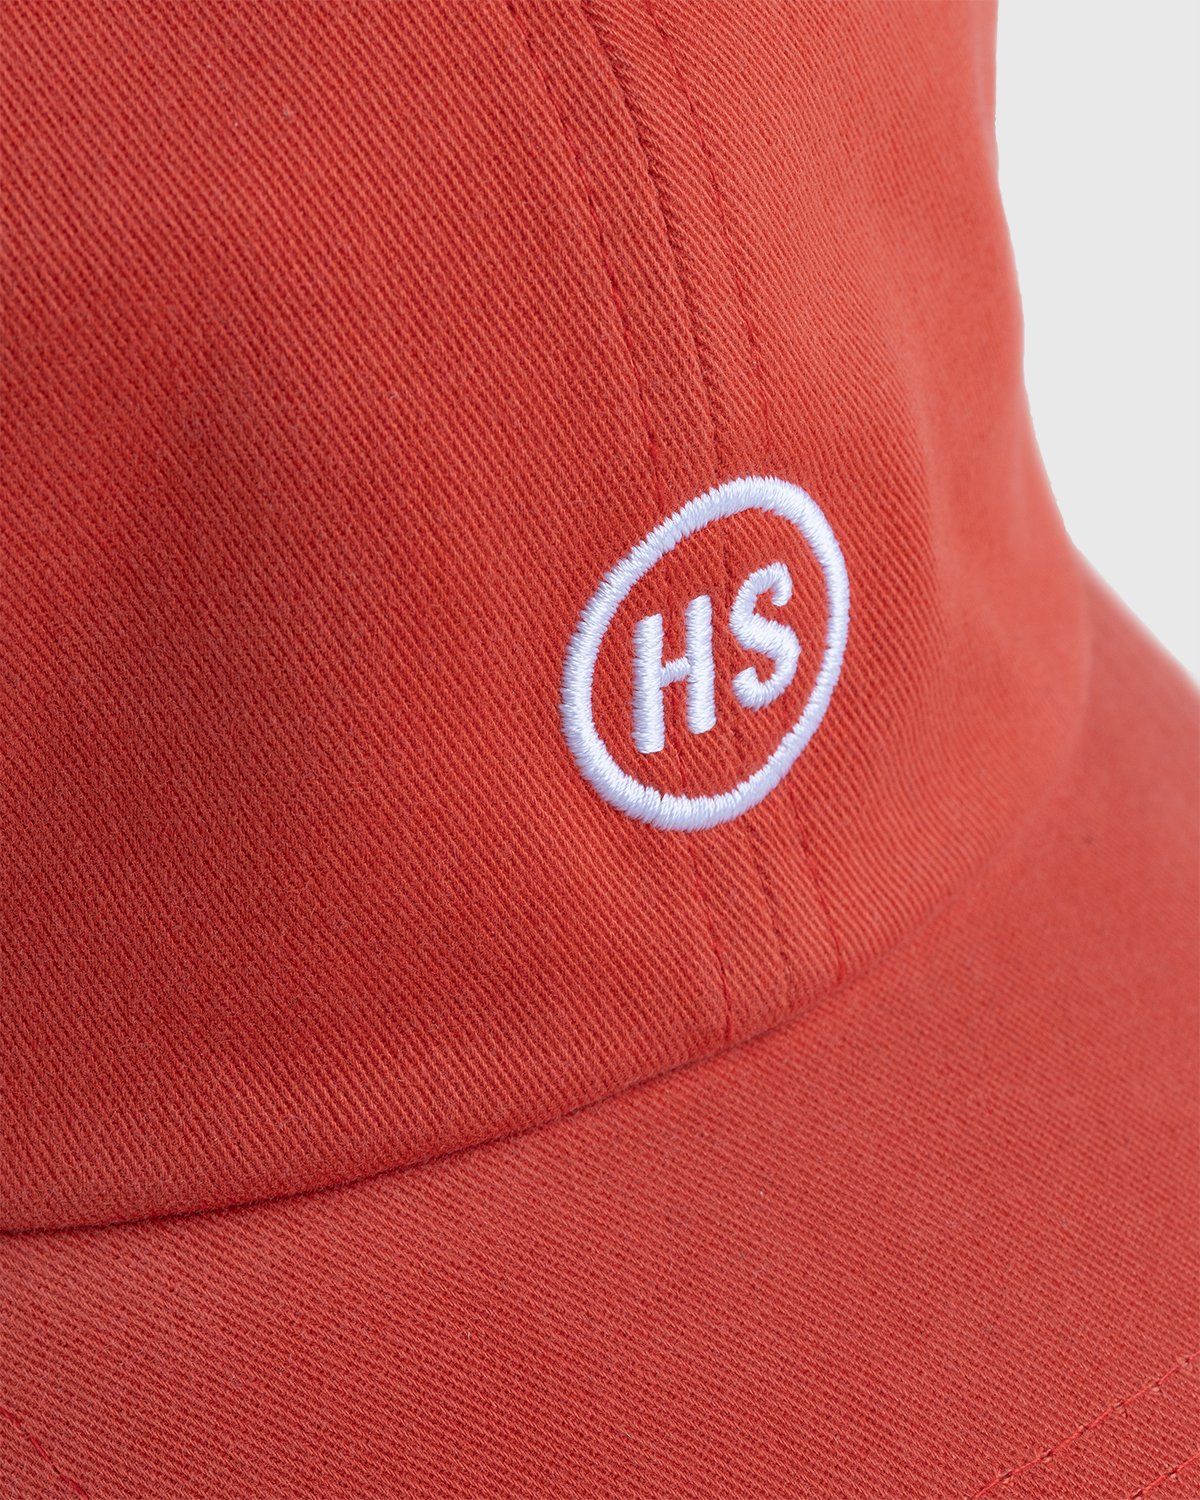 Highsnobiety - Baseball Cap Red - Accessories - Red - Image 3